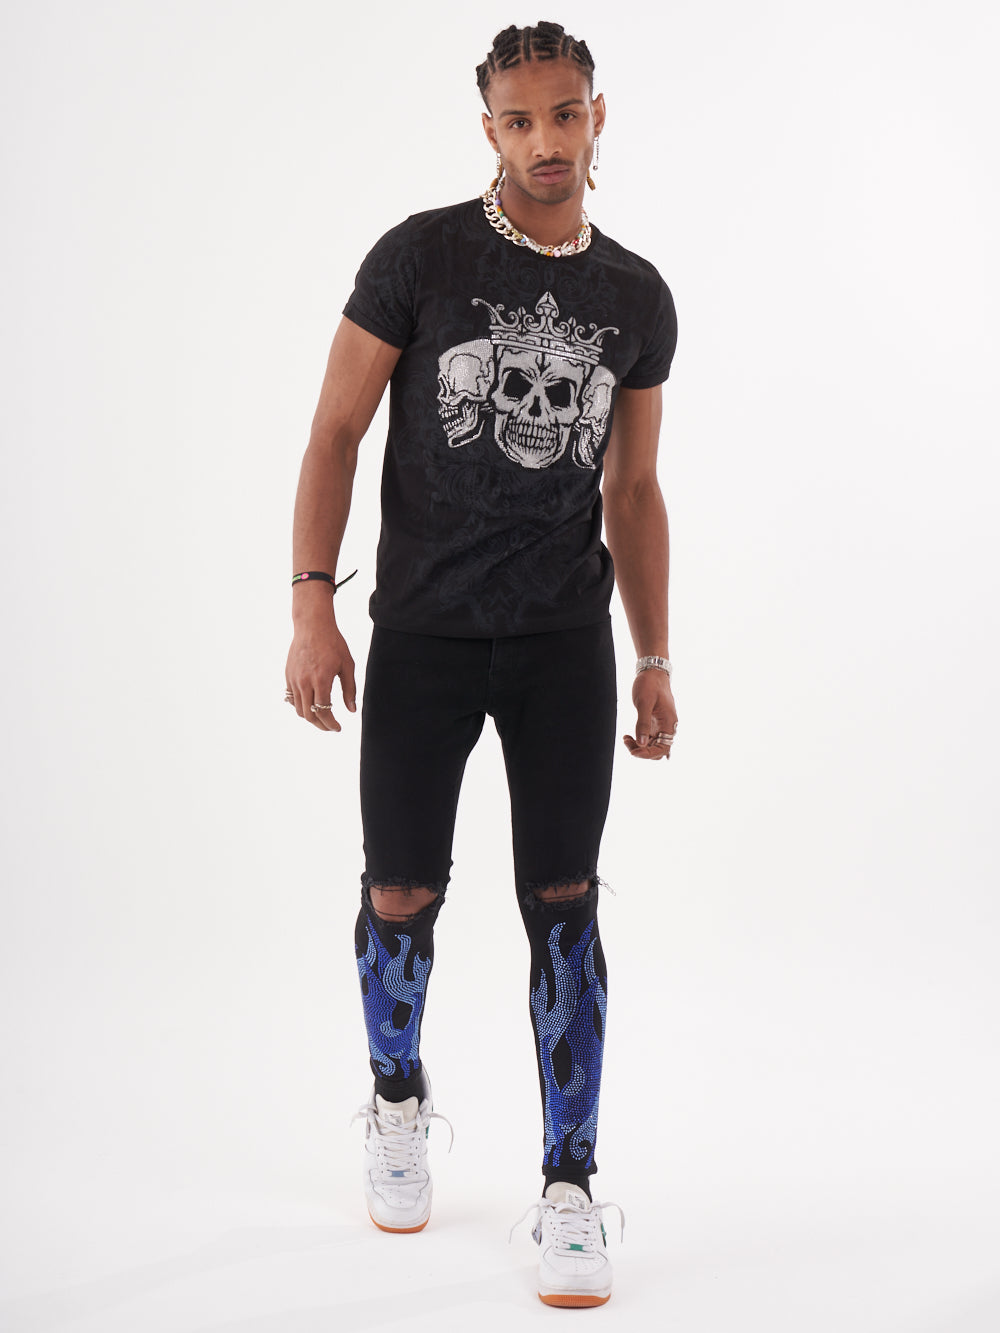 A man wearing a TRINITY T-SHIRT in black with skeleton print and slim fit blue leggings.